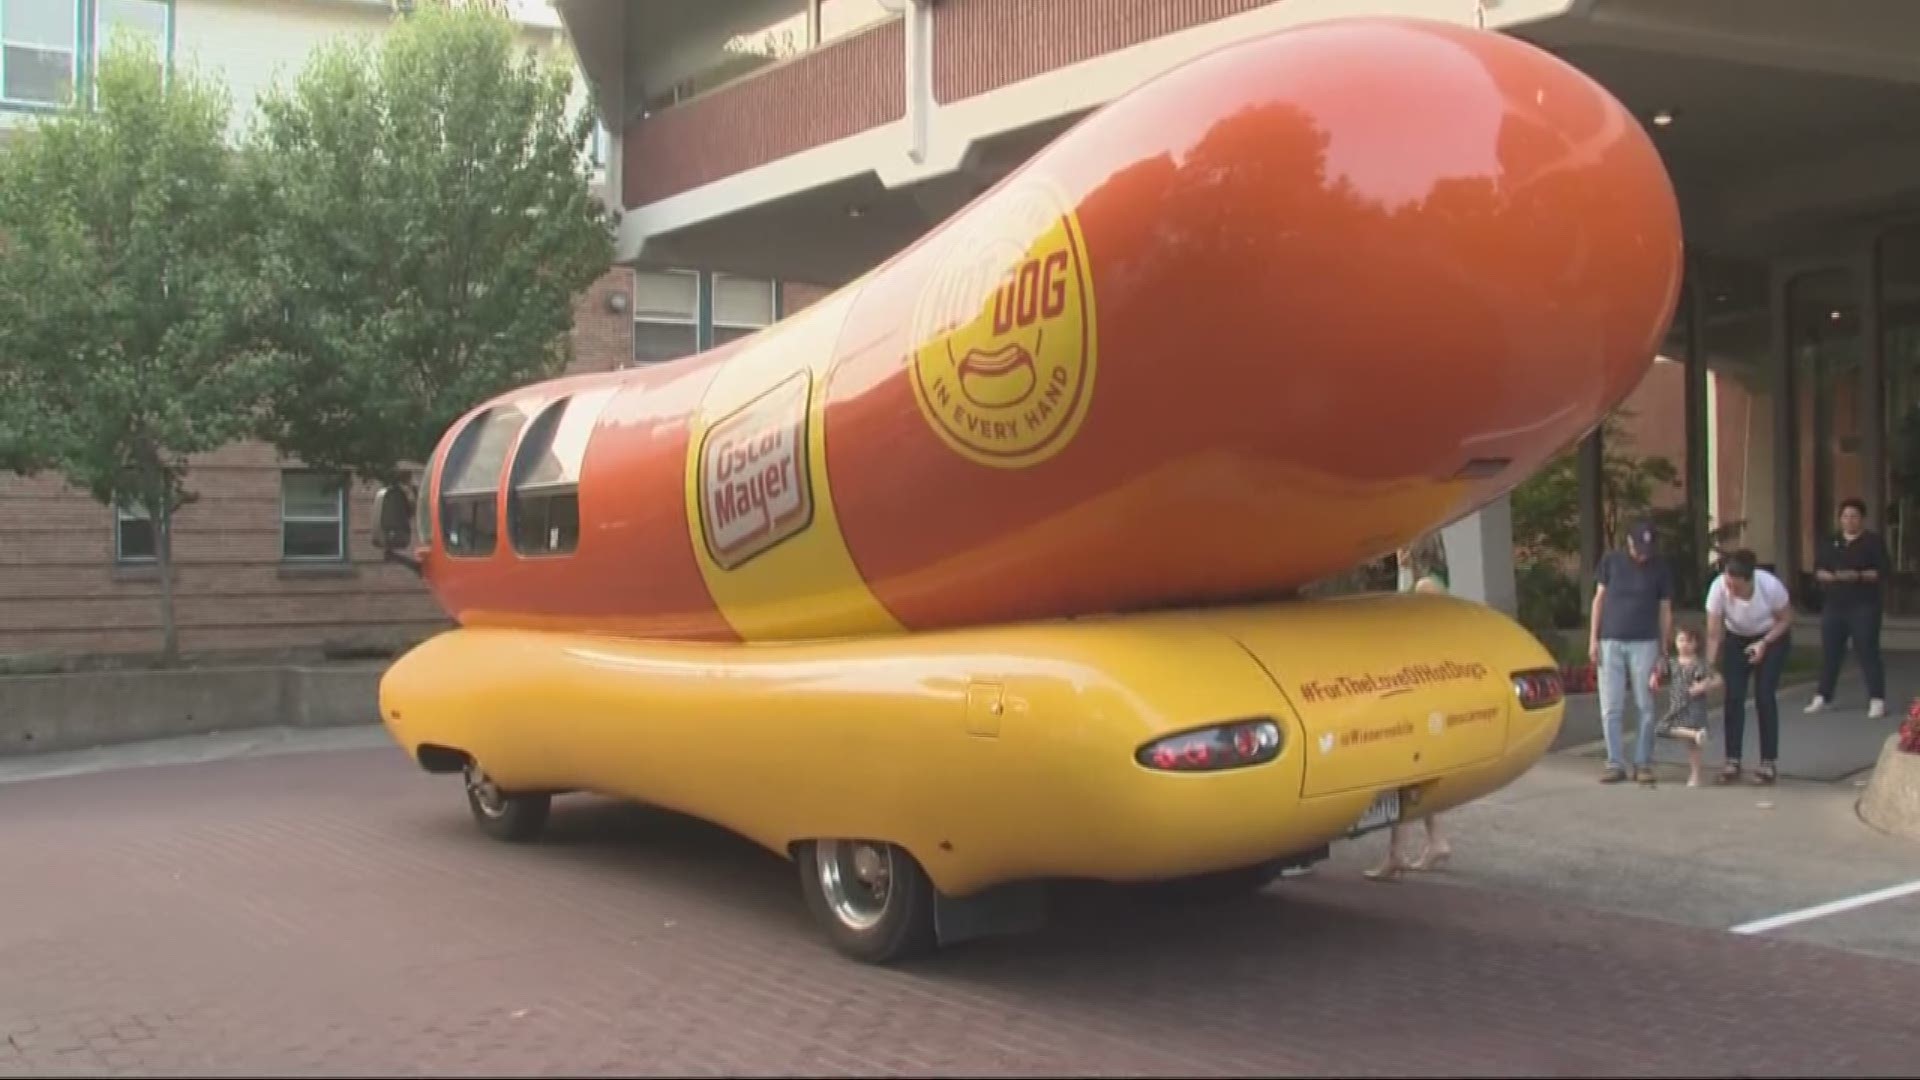 The Wienermobile is making stops at local Fred Meyer stores this week
oscarmayer.com/wienermobile
#TonightwithCassidy